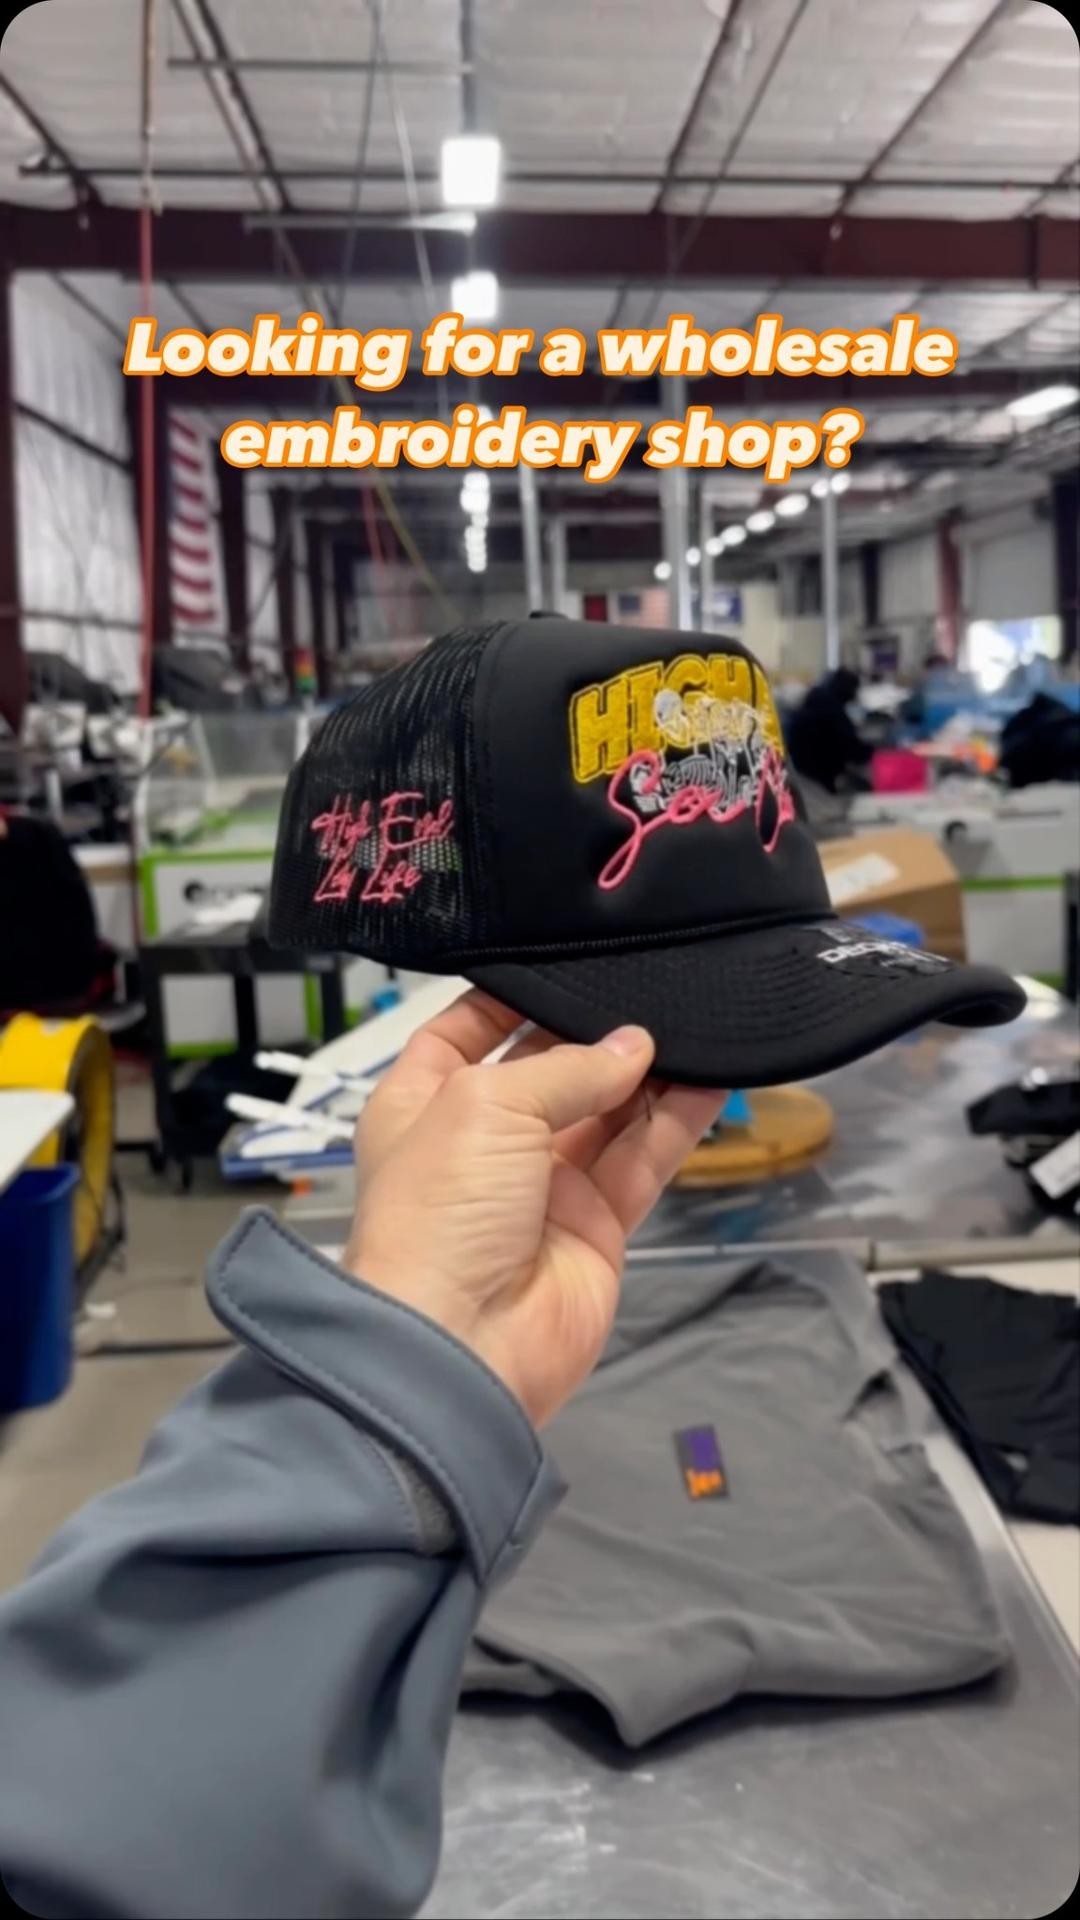 Hand holding a custom embroidered cap in a workshop environment with a promotional question about wholesale embroidery services.